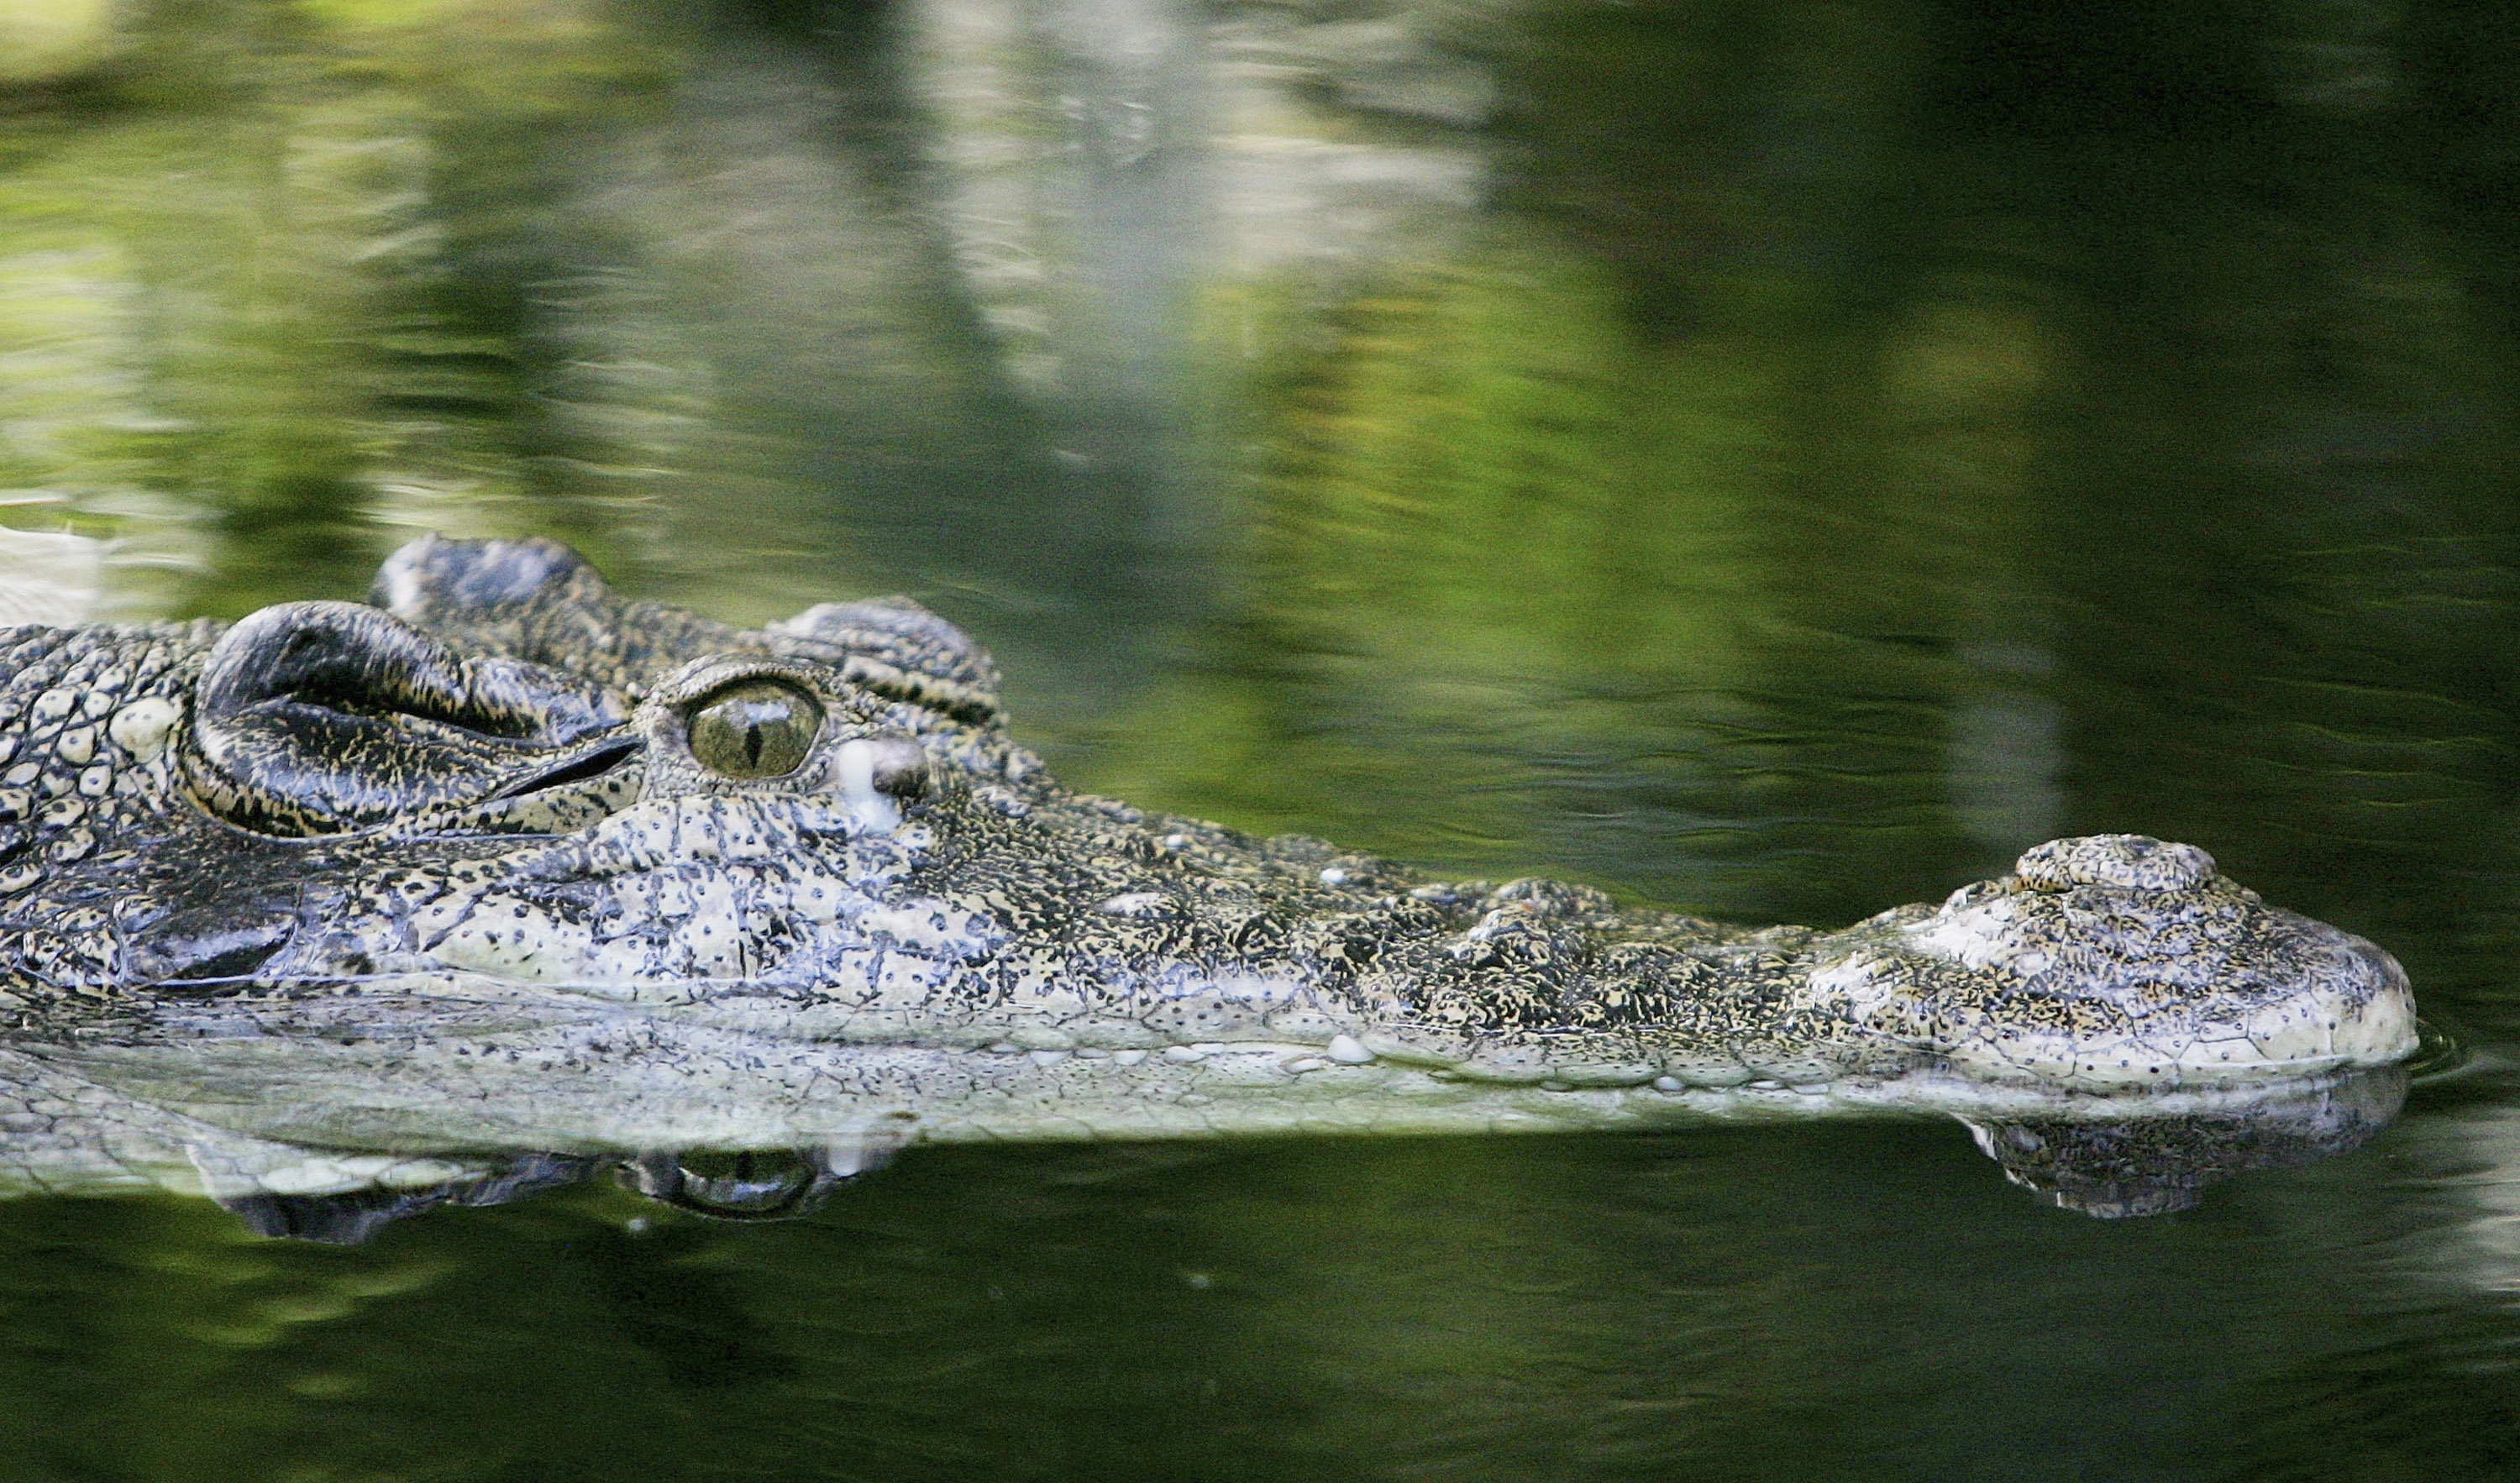 Woman Punches Crocodile To Save Twin Sister Attacked While Swimming